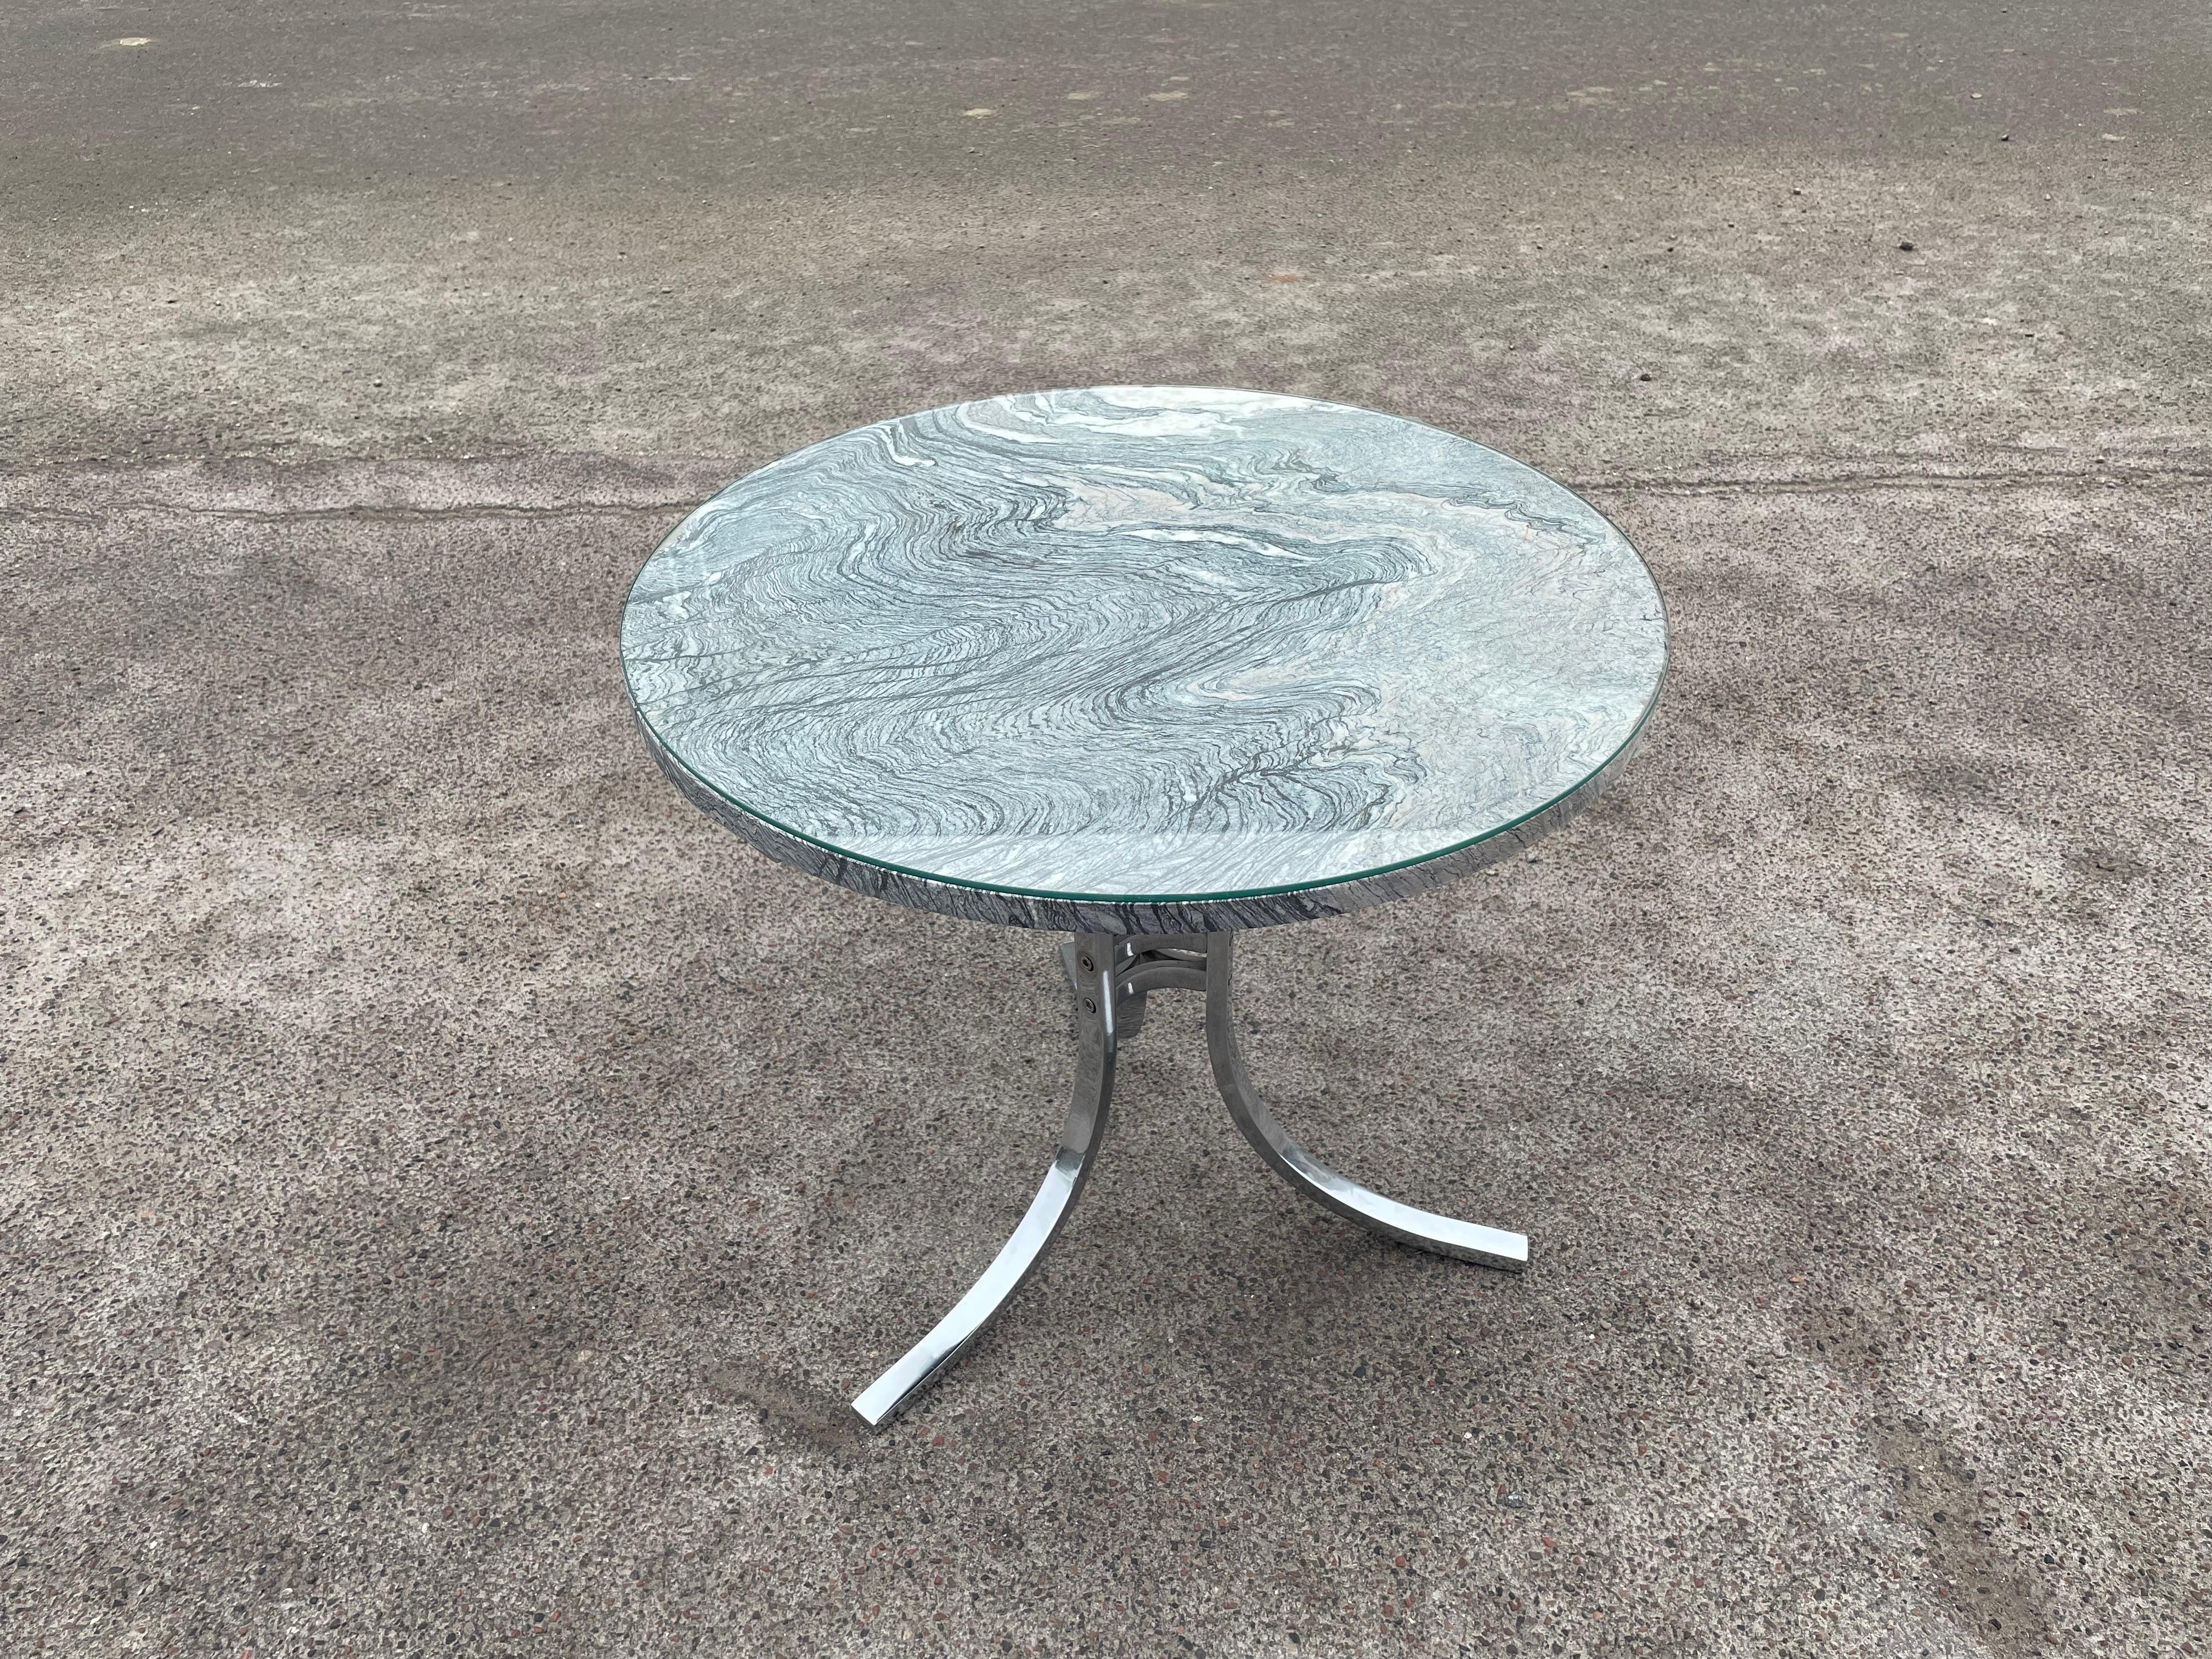 Vintage modern side table feature a round marble top with glass on top and an elegant chrome base.